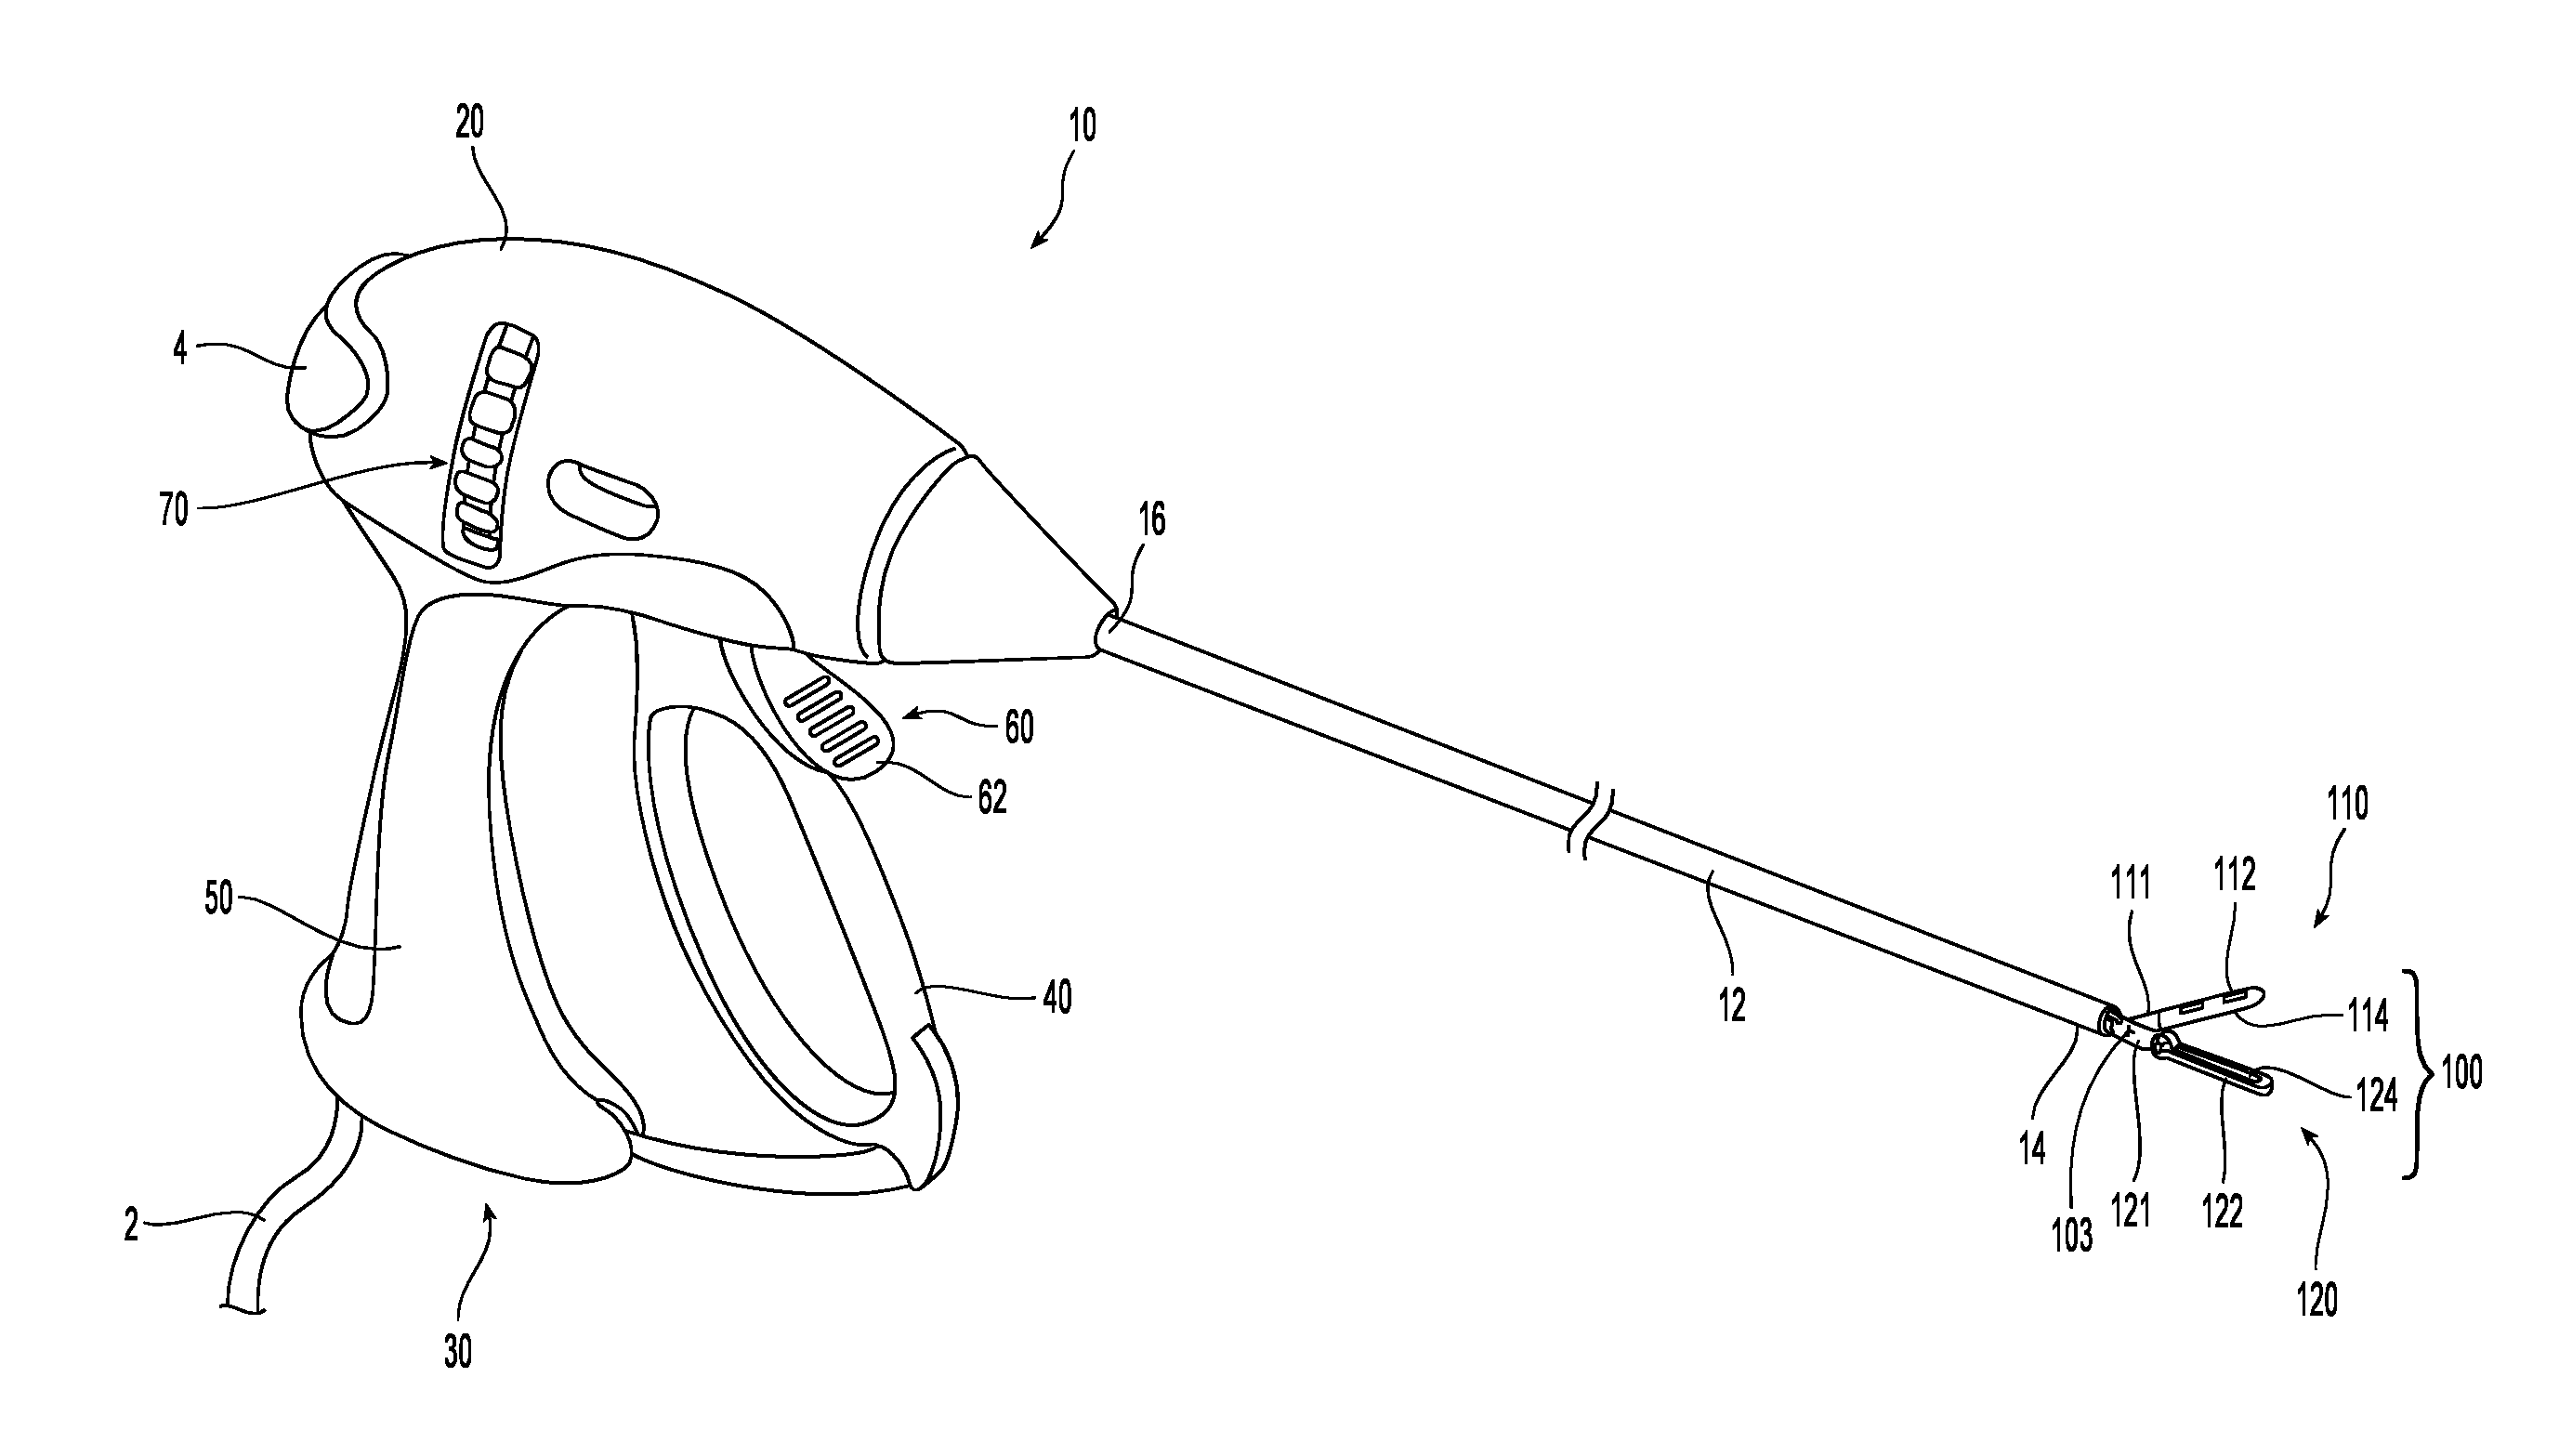 Surgical instruments and methods for performing tonsillectomy and adenoidectomy procedures